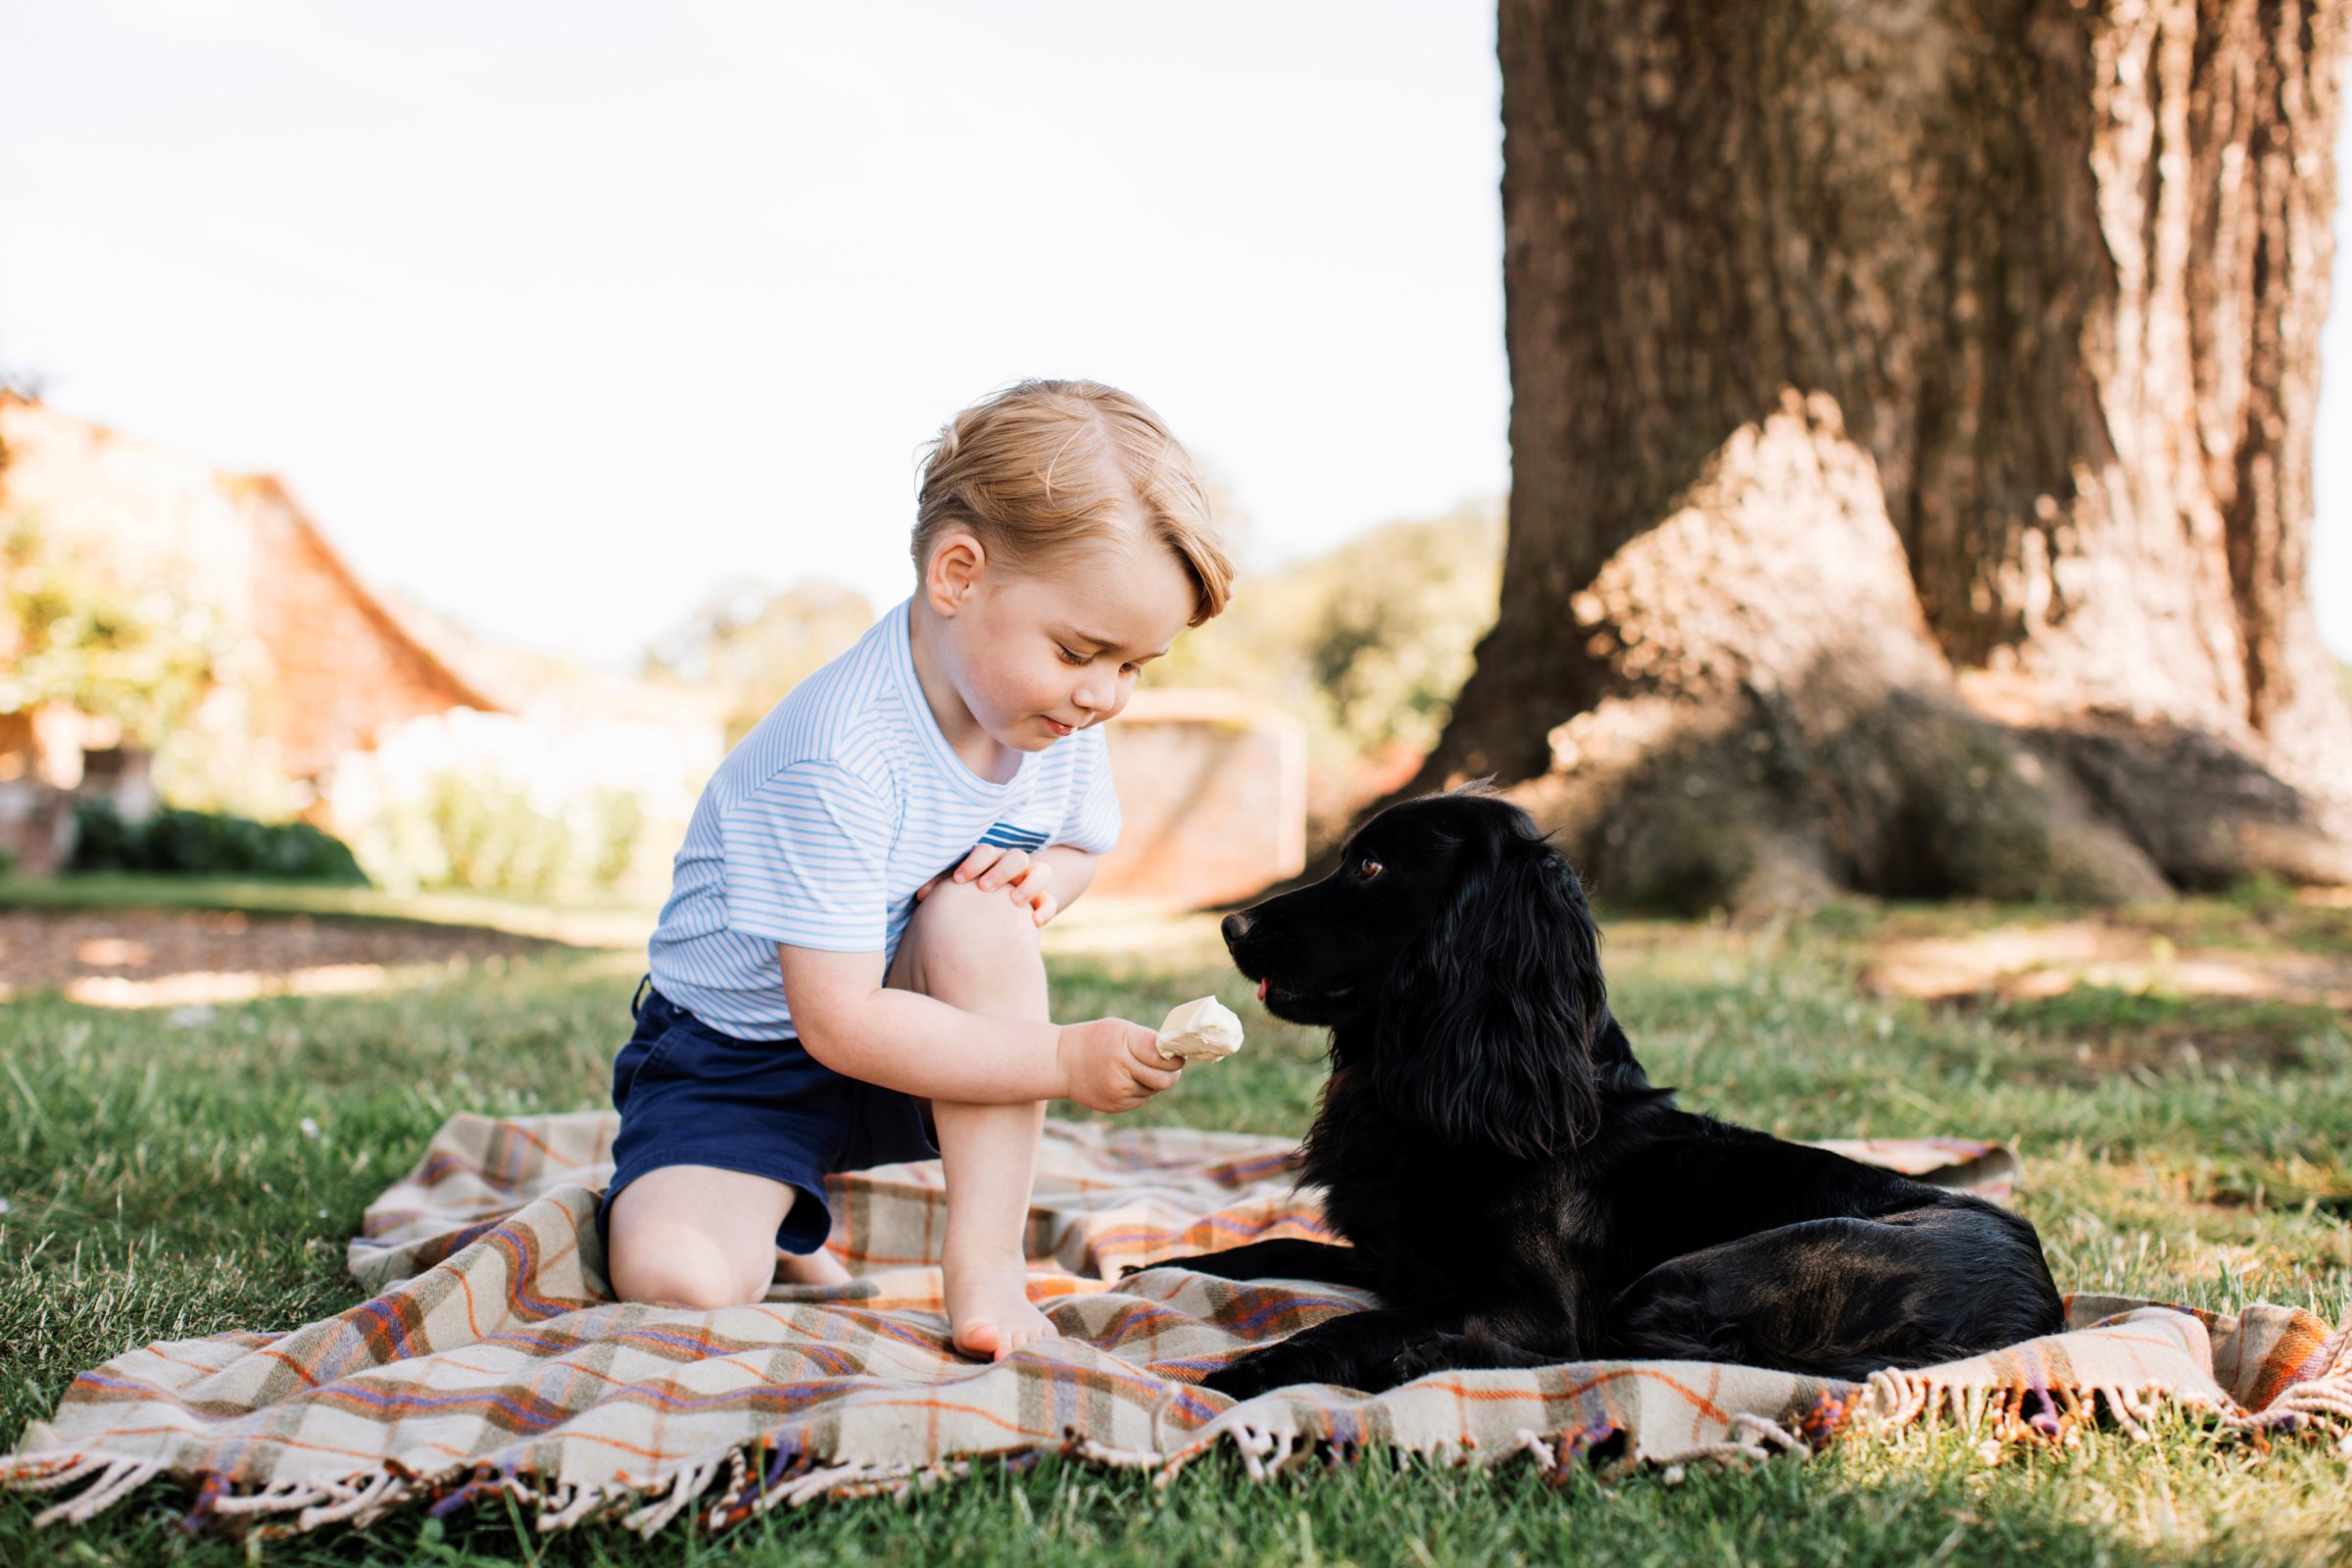 Britain's Prince George is seen with the family pet dog, Lupo, in this photograph taken in mid-July at his home in Norfolk and released by Kensington Palace to mark his third birthday, in London, July 22, 2016.